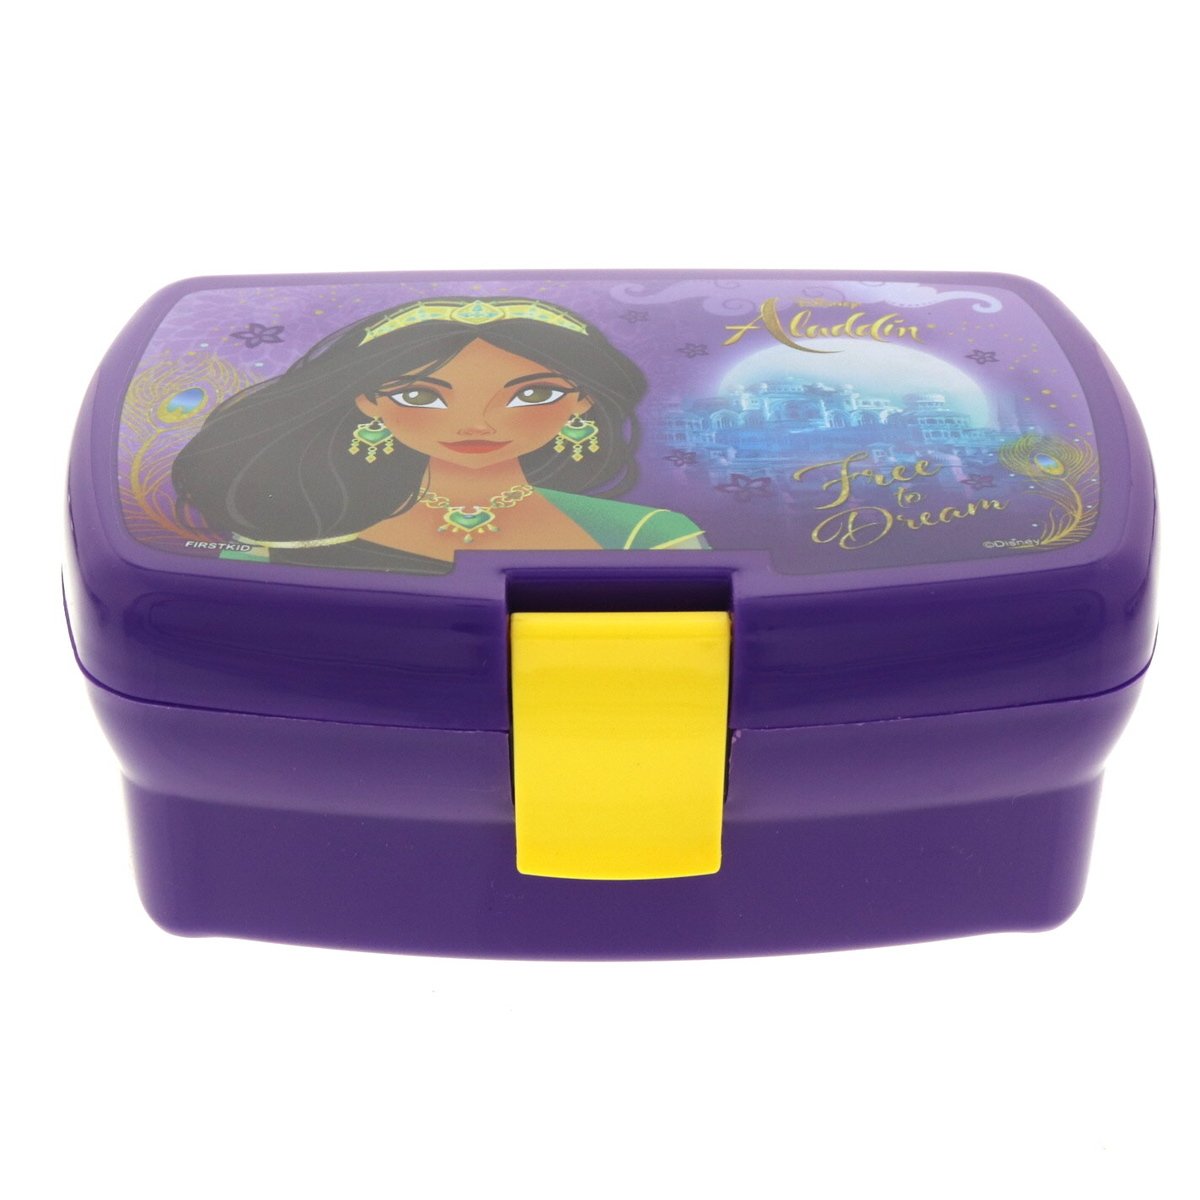 Aladdin Lunch Box With Tray 112-11-0901